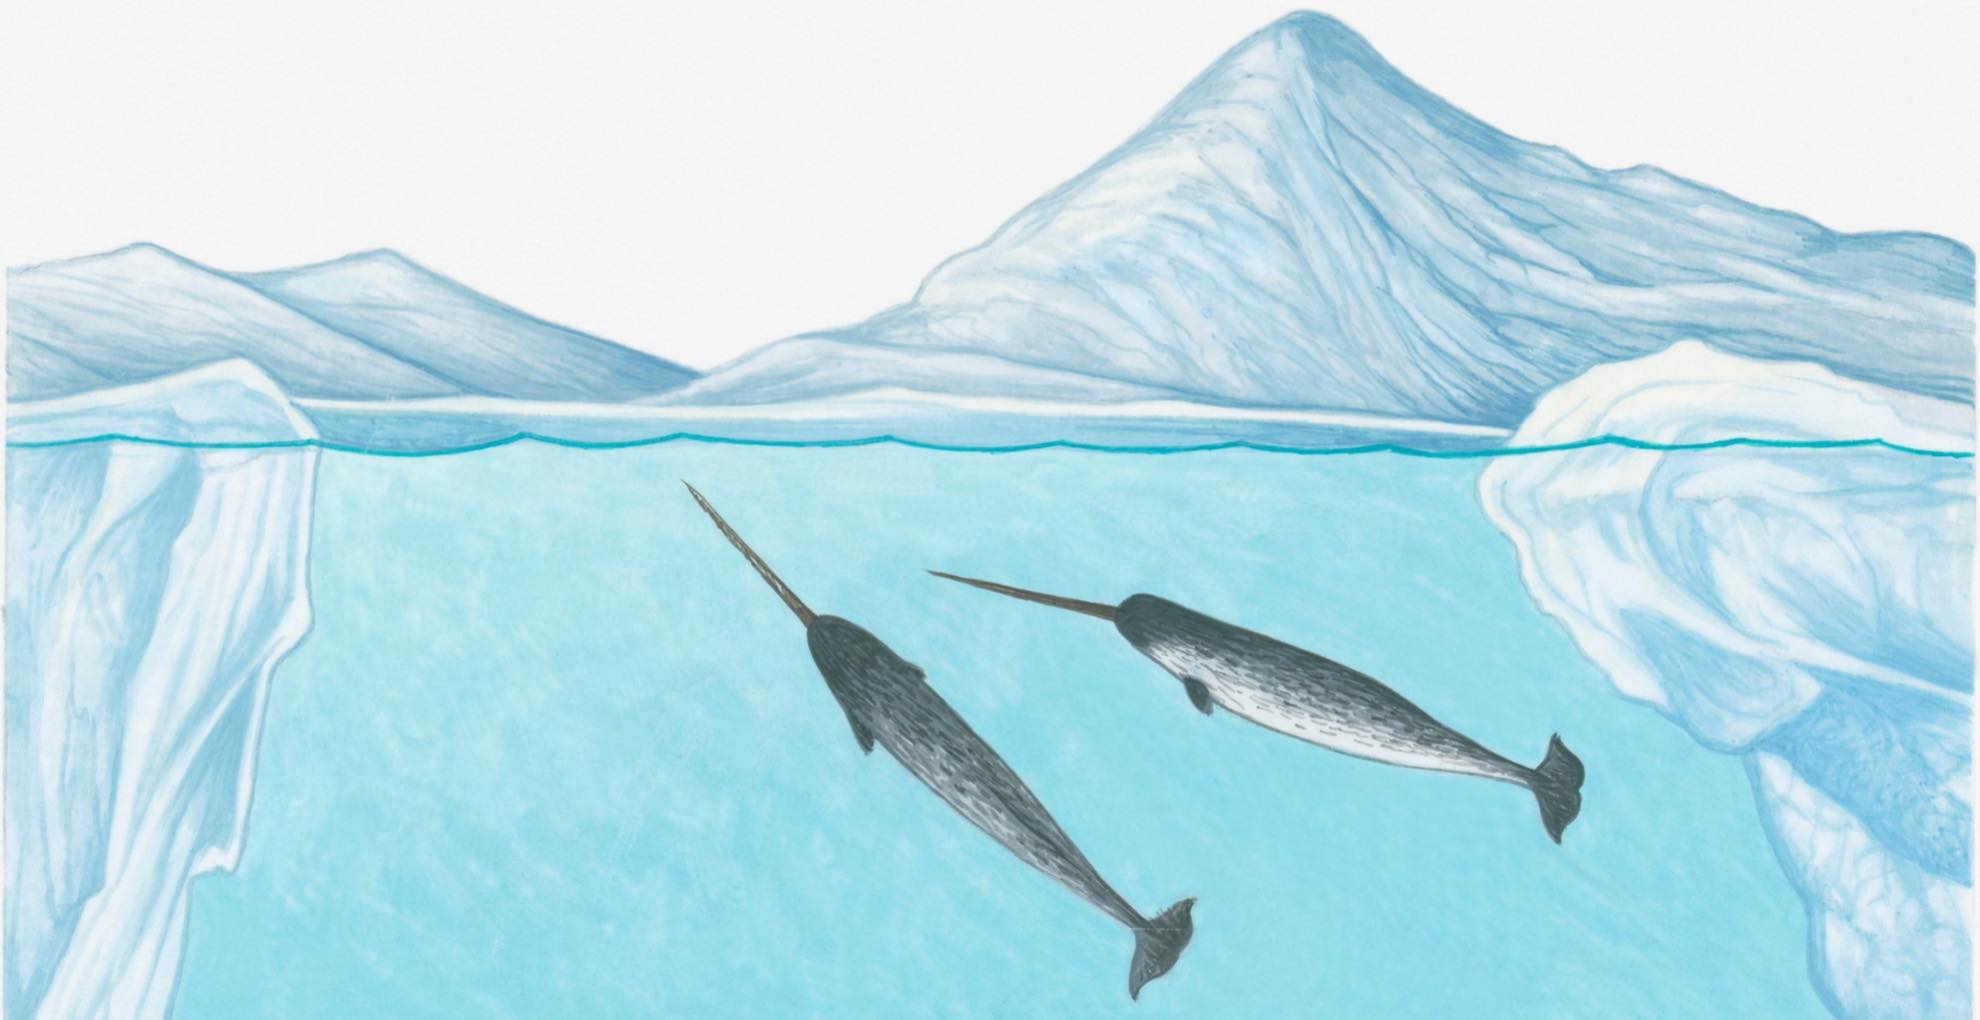 Like humans, many cetacean species, including dolphins and narwhals, developed bigger brains to match their body size. Brain size is often linked to complex cognitive function.